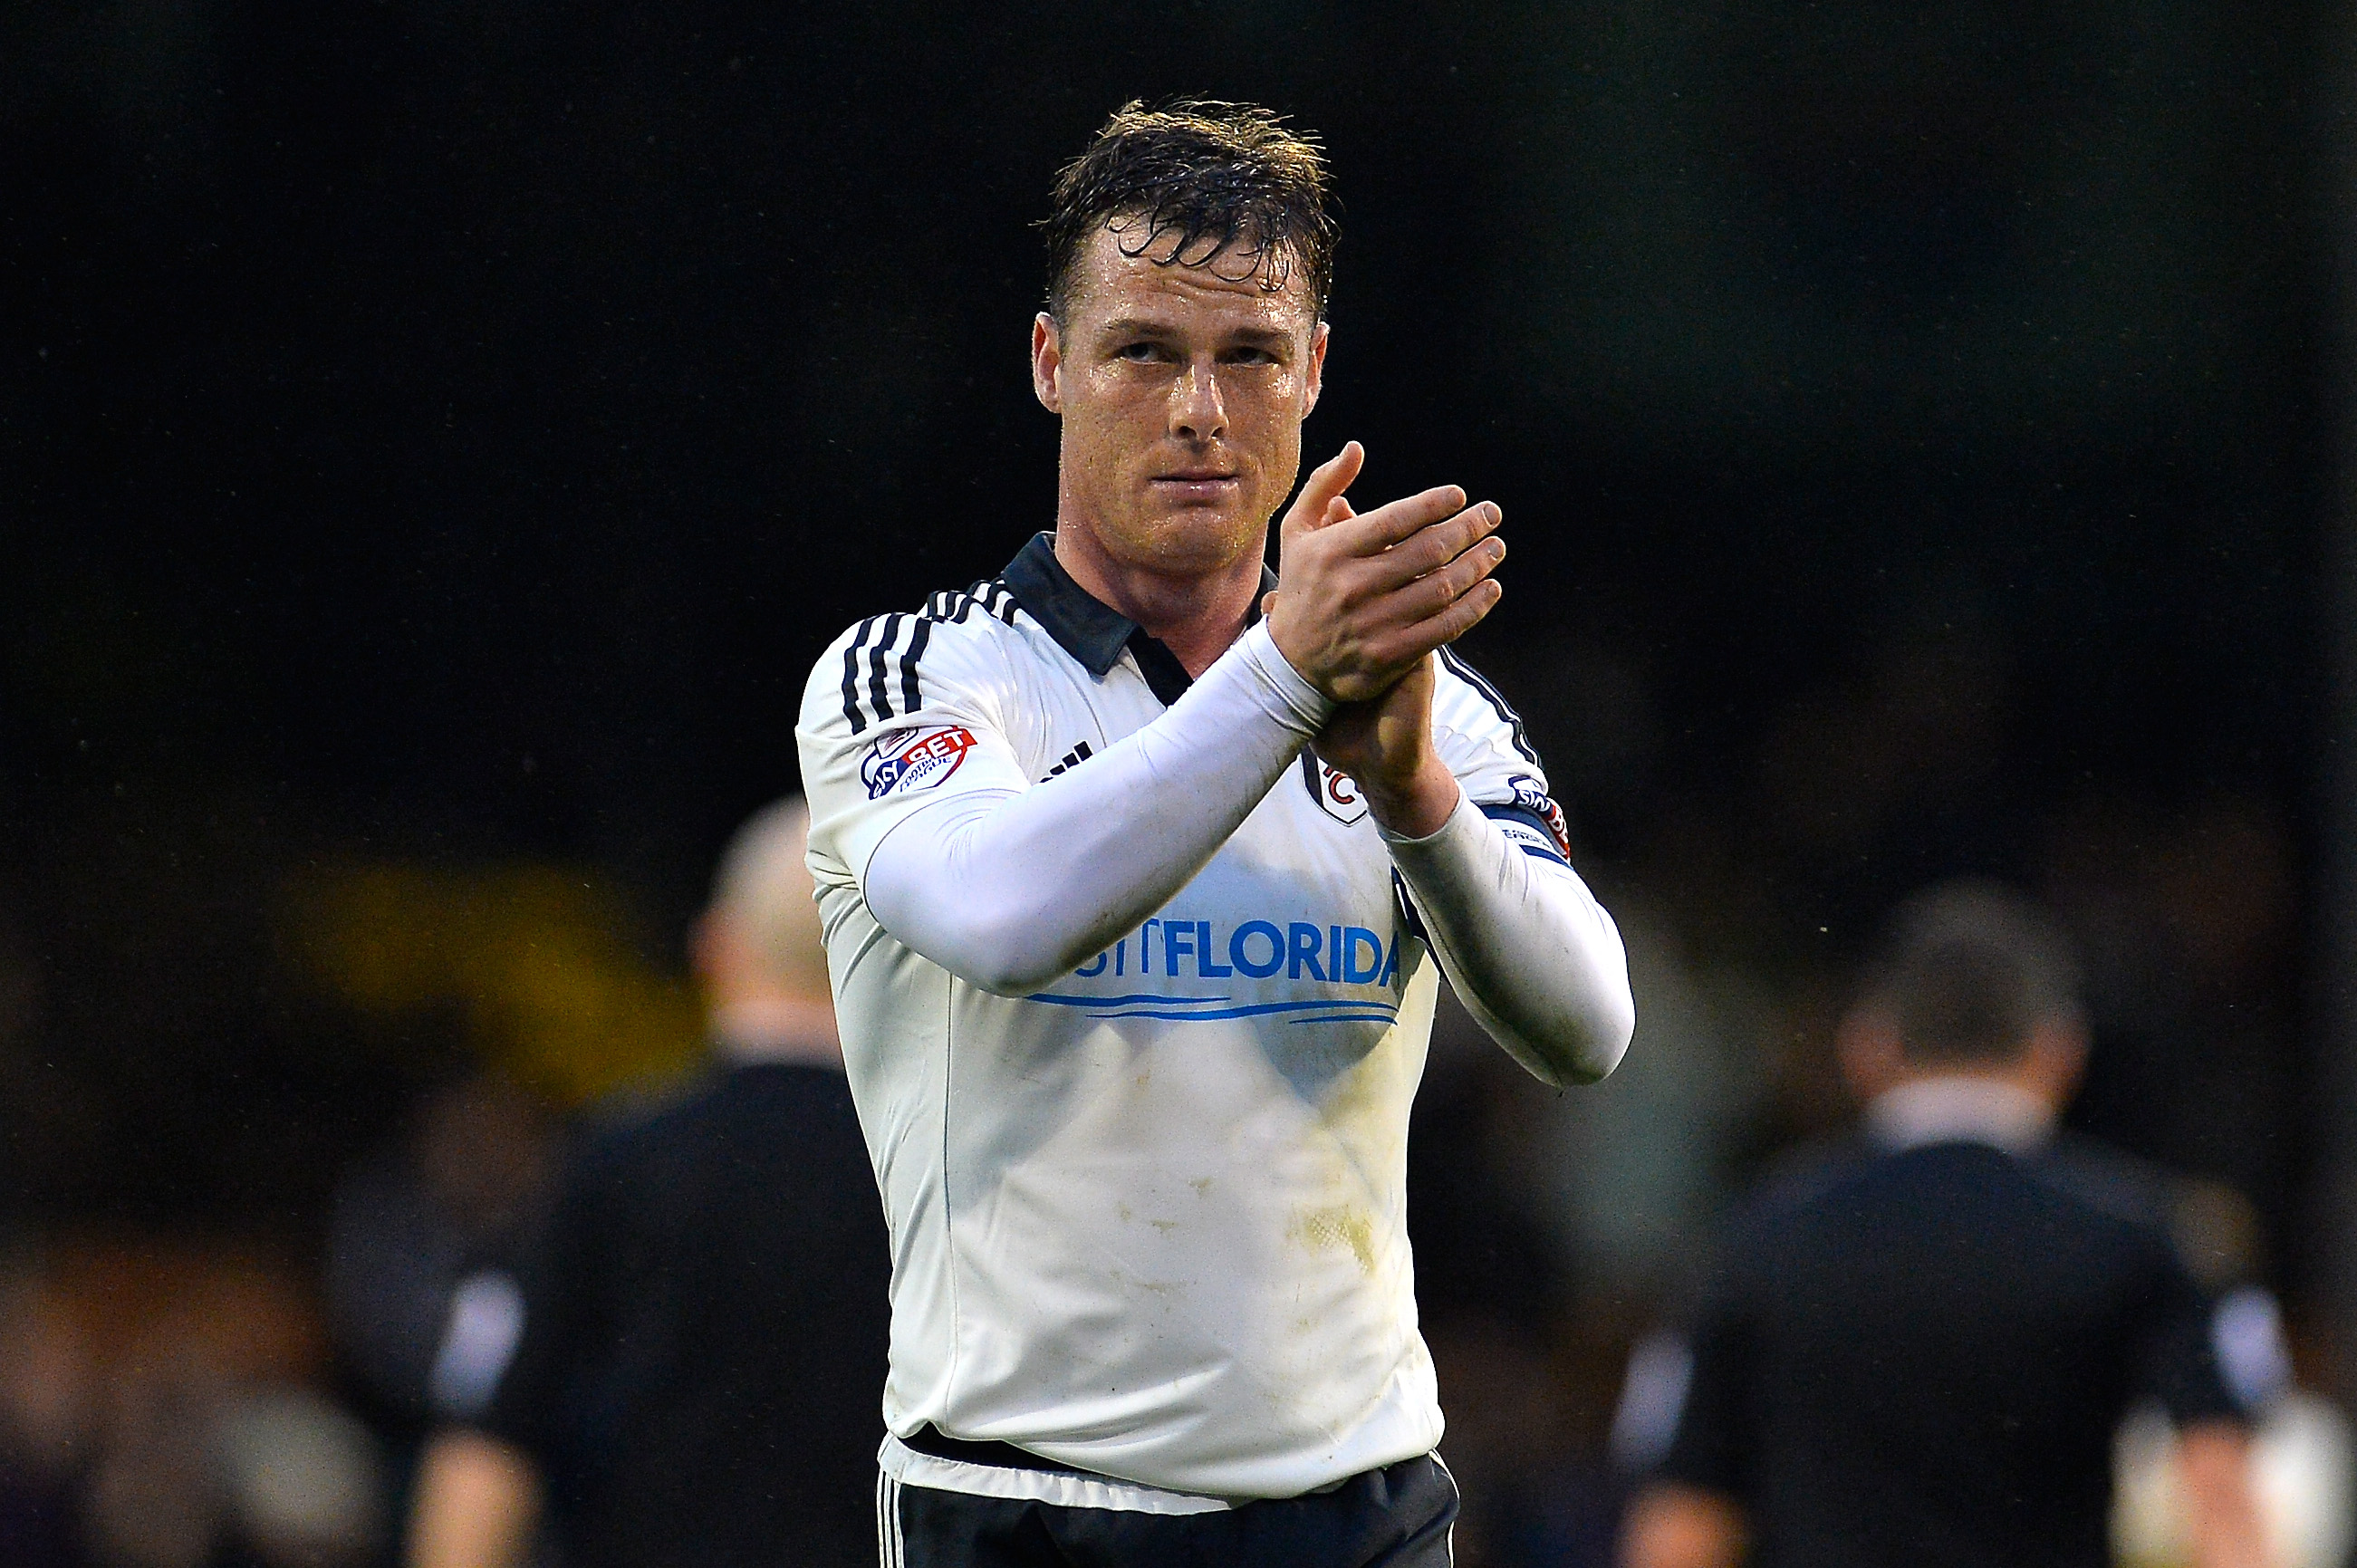 Scott Parker applauds the Fulham fans after a win over Charlton Athletic in the Championship in February 2016.